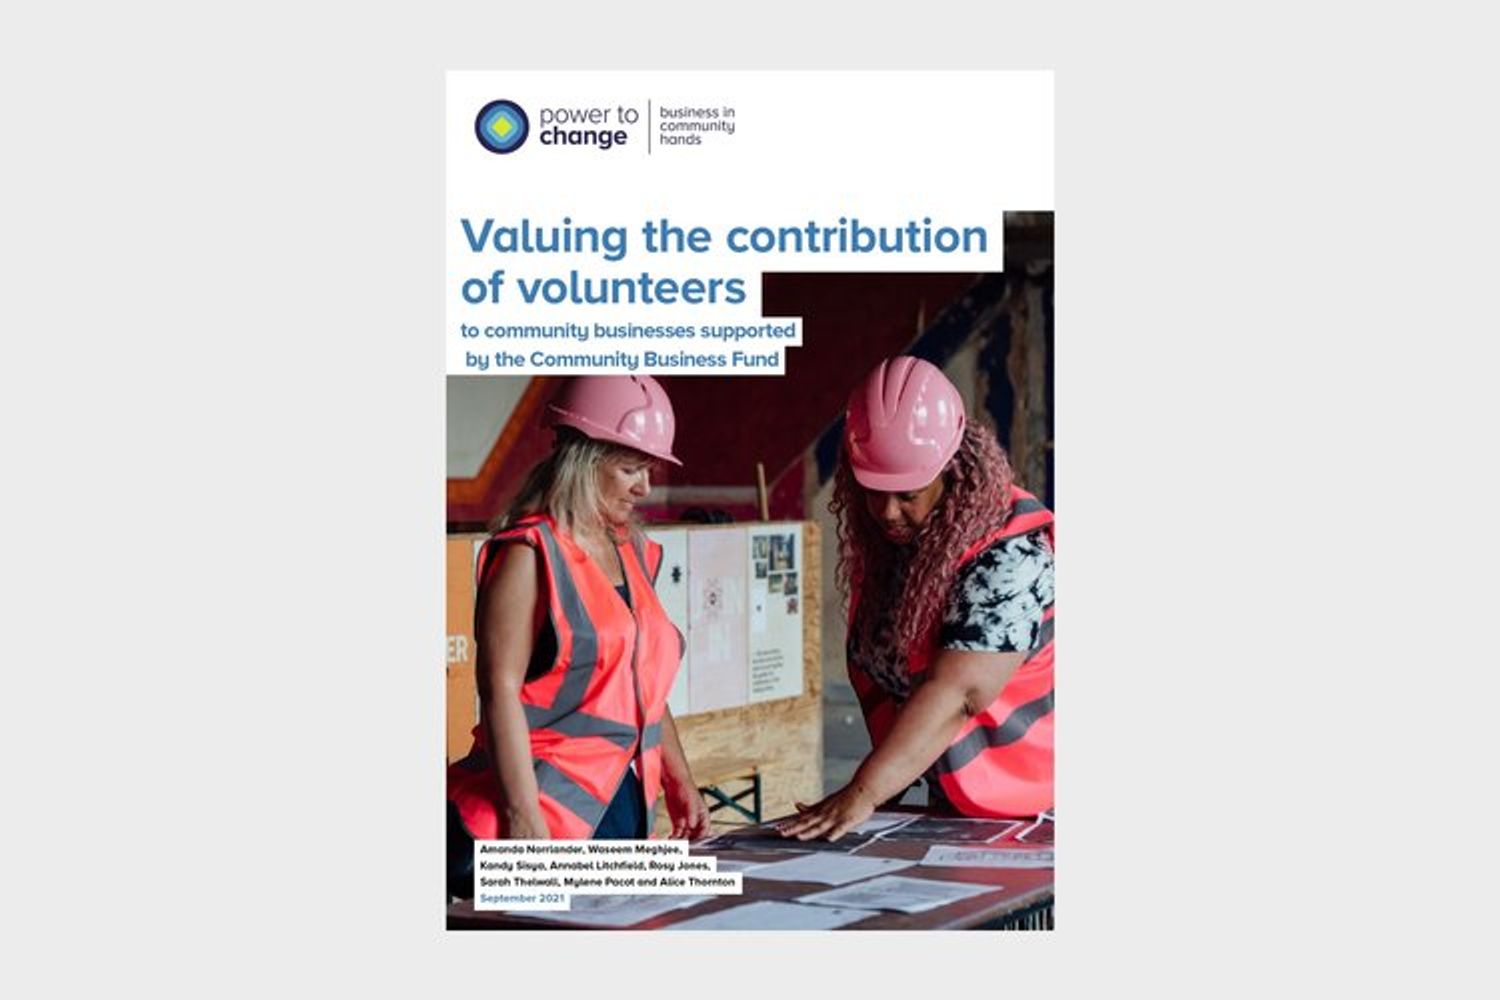 image for article: Valuing the contribution of volunteers